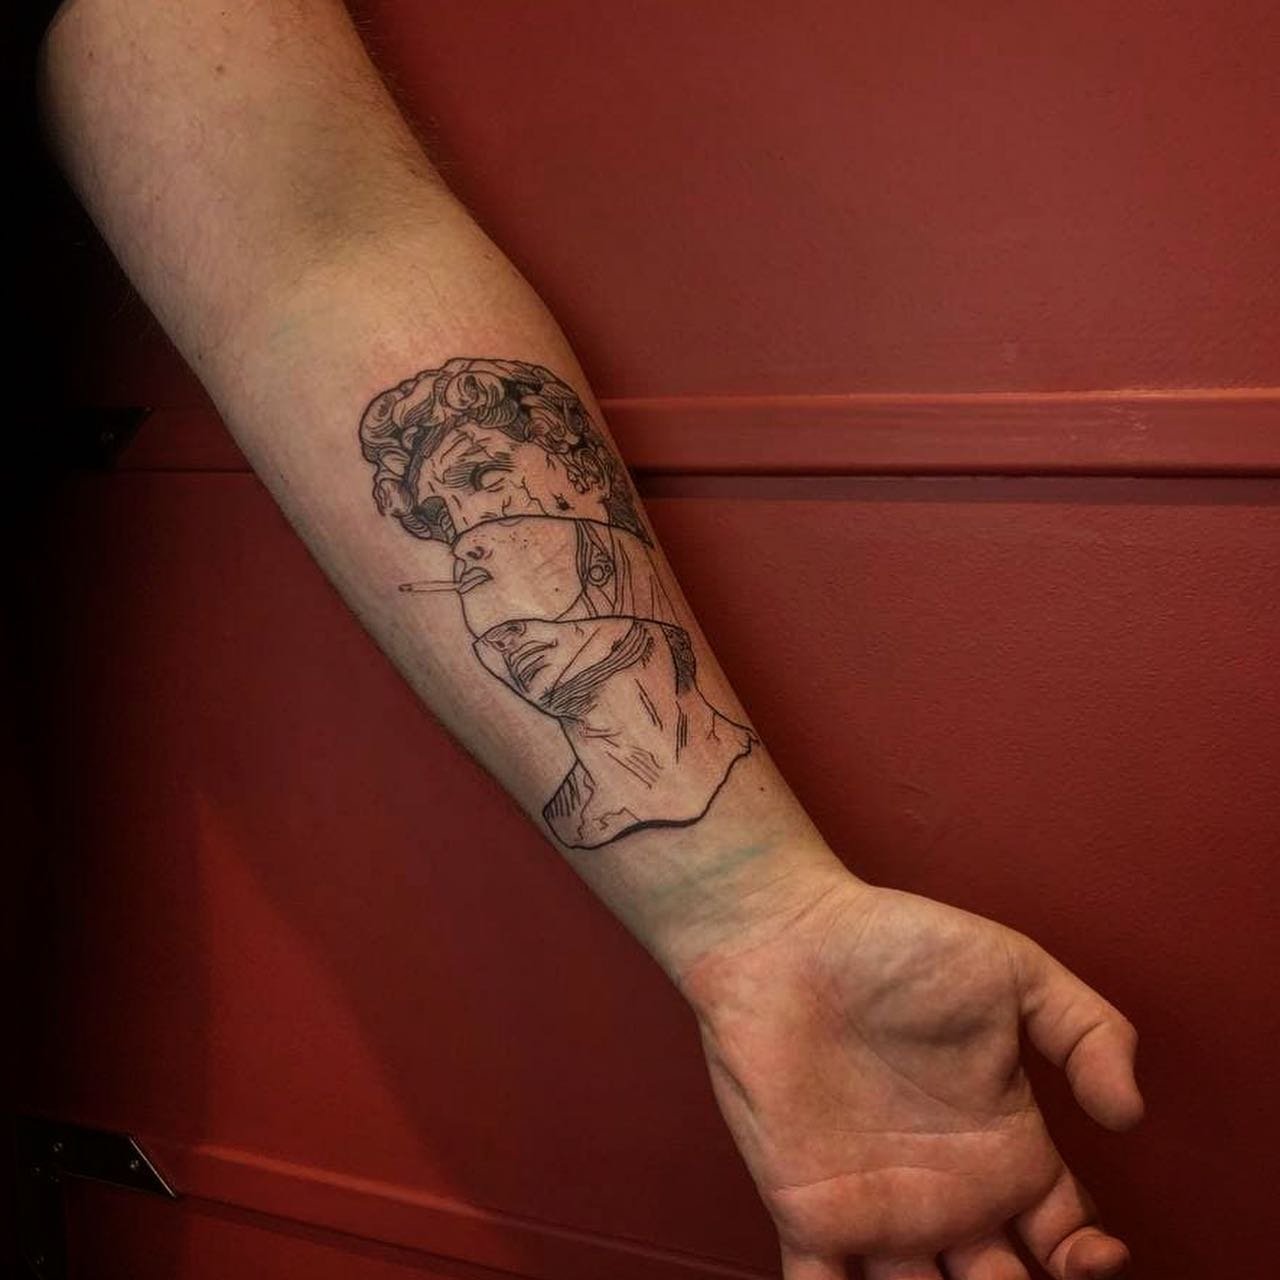 Really dig this style of art, I assume Renaissance art? Yeah just that  whole religious art shit looks good. : r/TattooDesigns